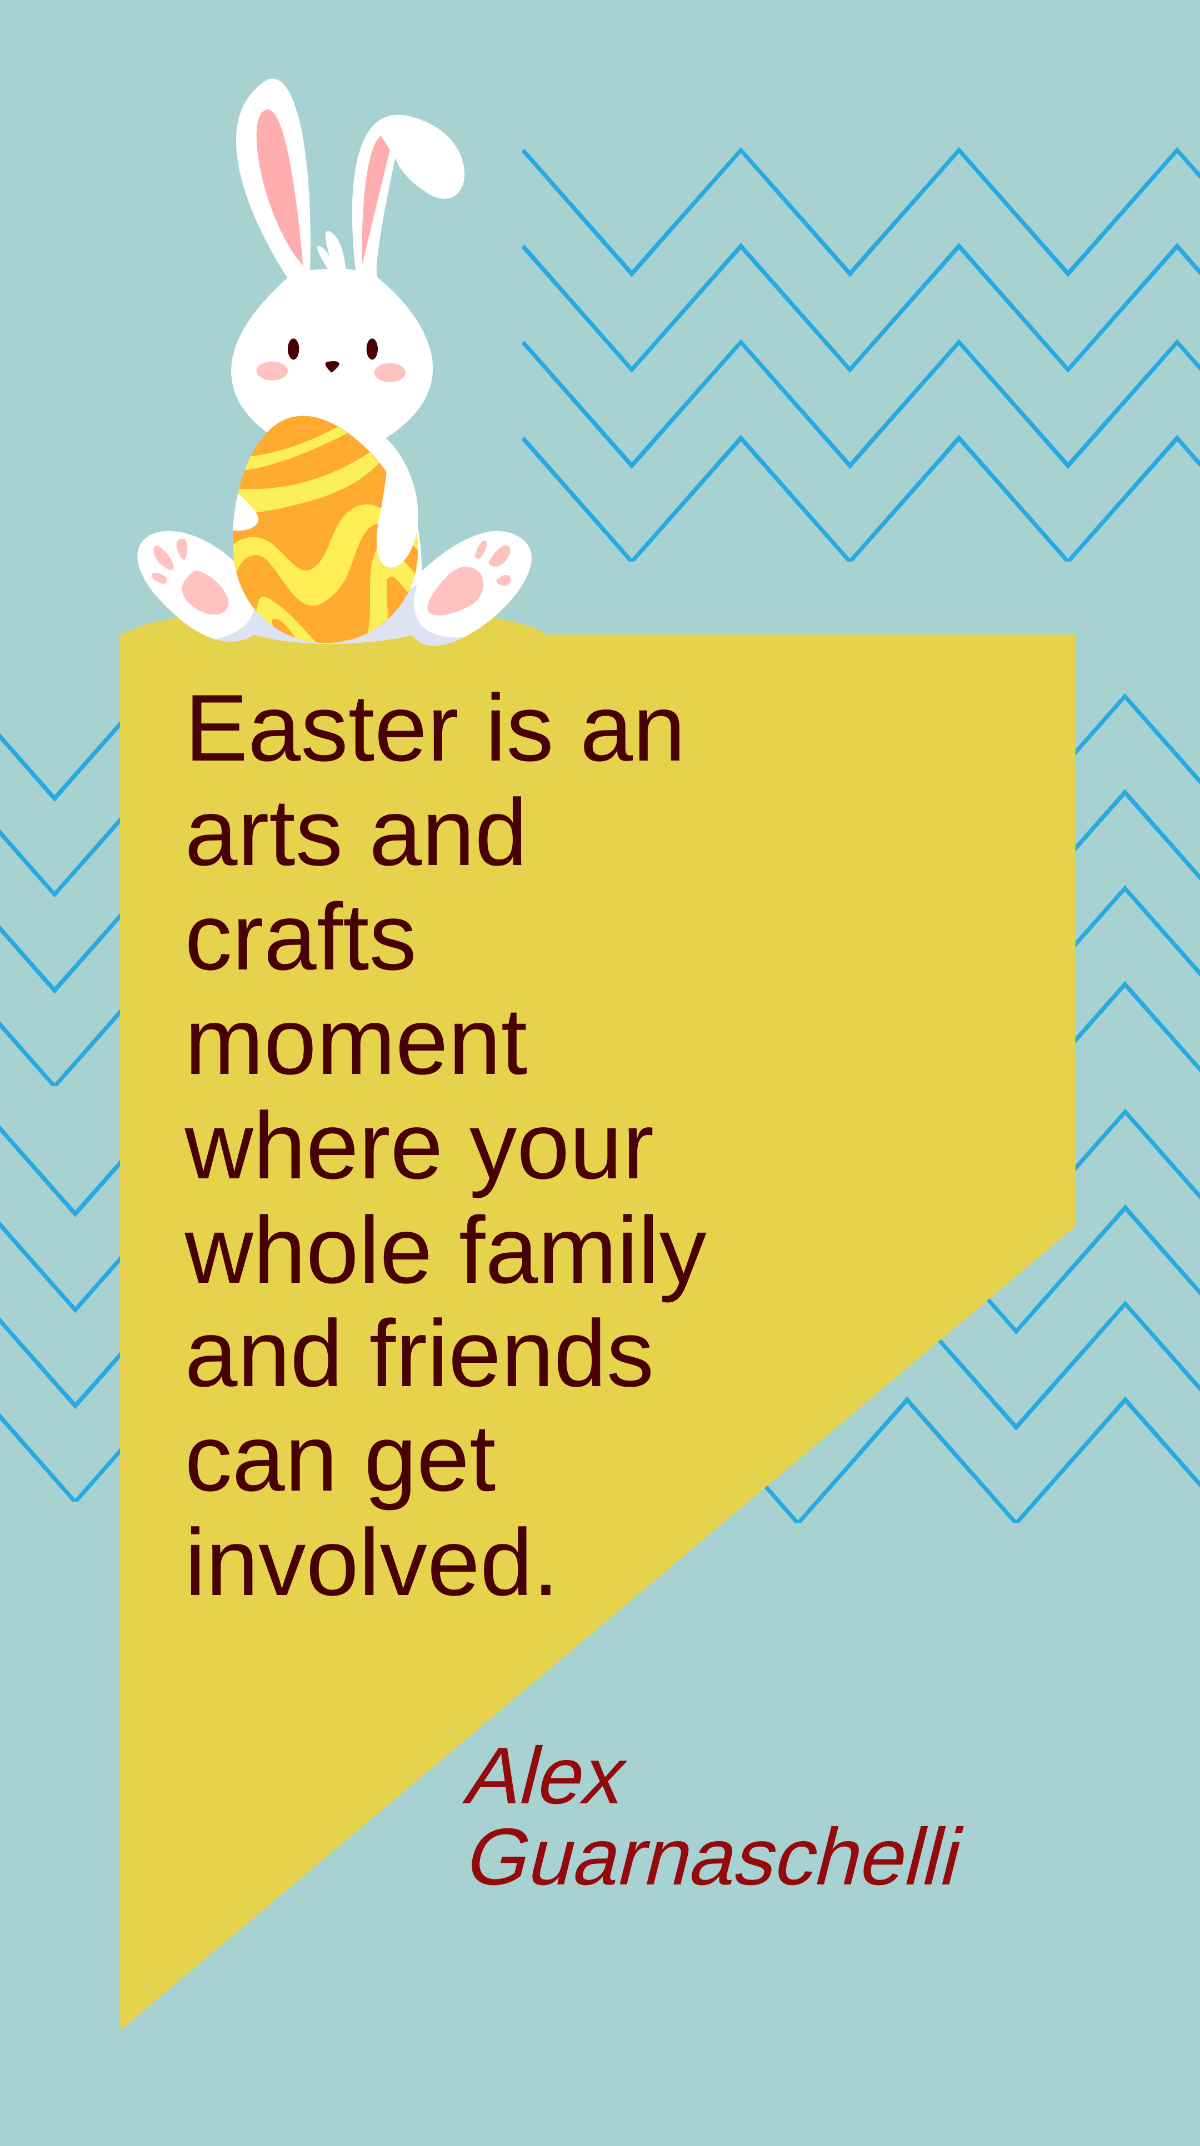 Alex Guarnaschelli - Easter is an arts and crafts moment where your whole family and friends can get involved. Template